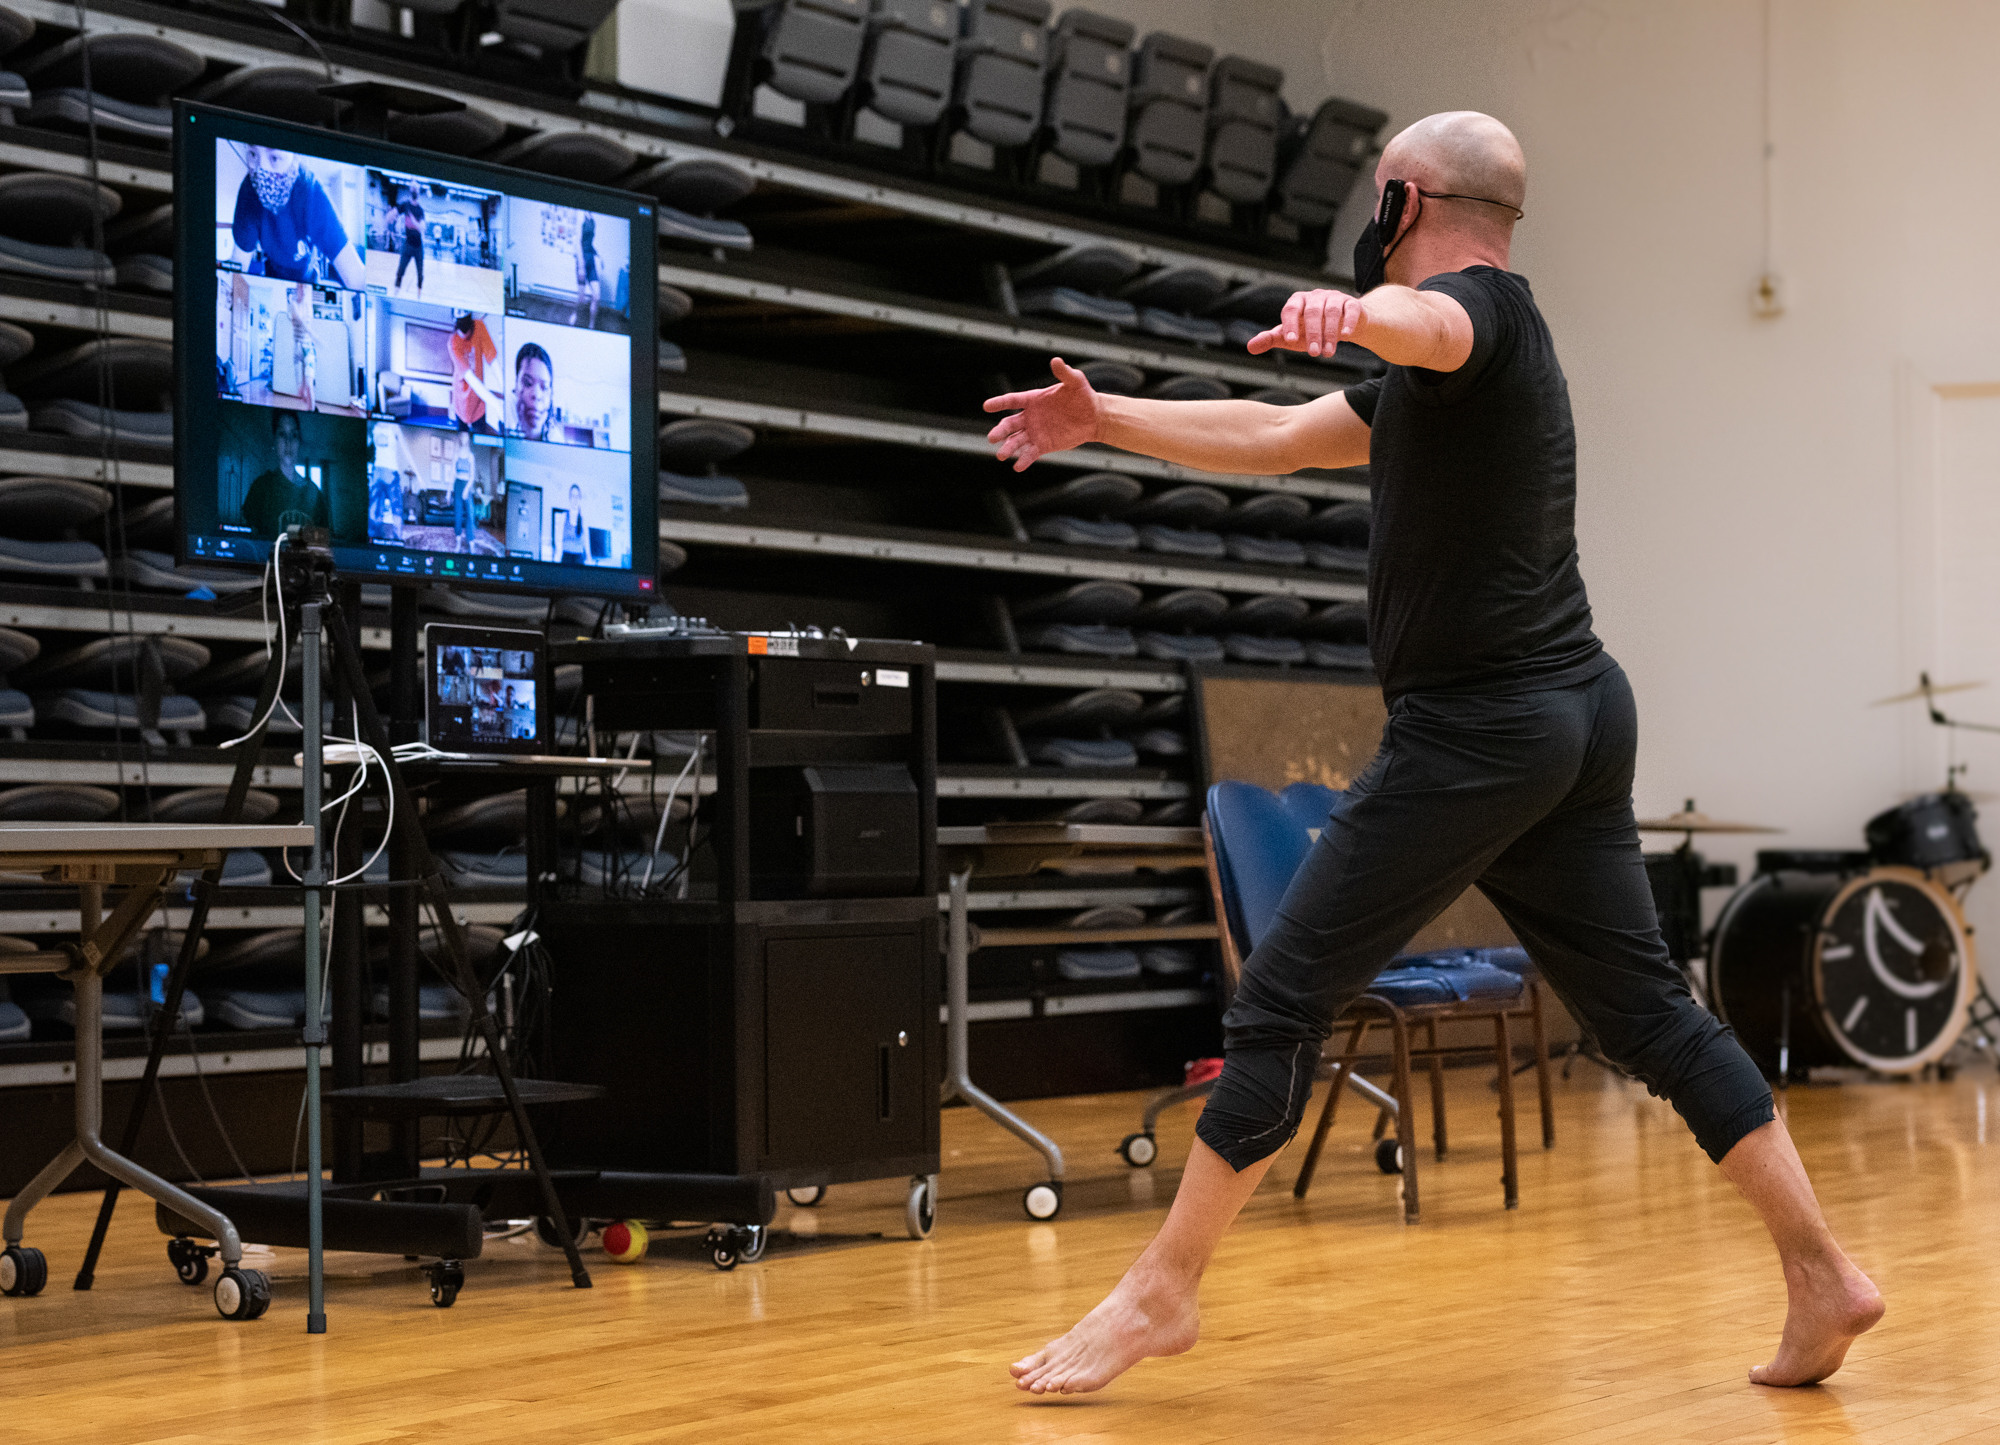 A man dances barefoot in front of a large screen that shows video call participants as part of remote dance practice